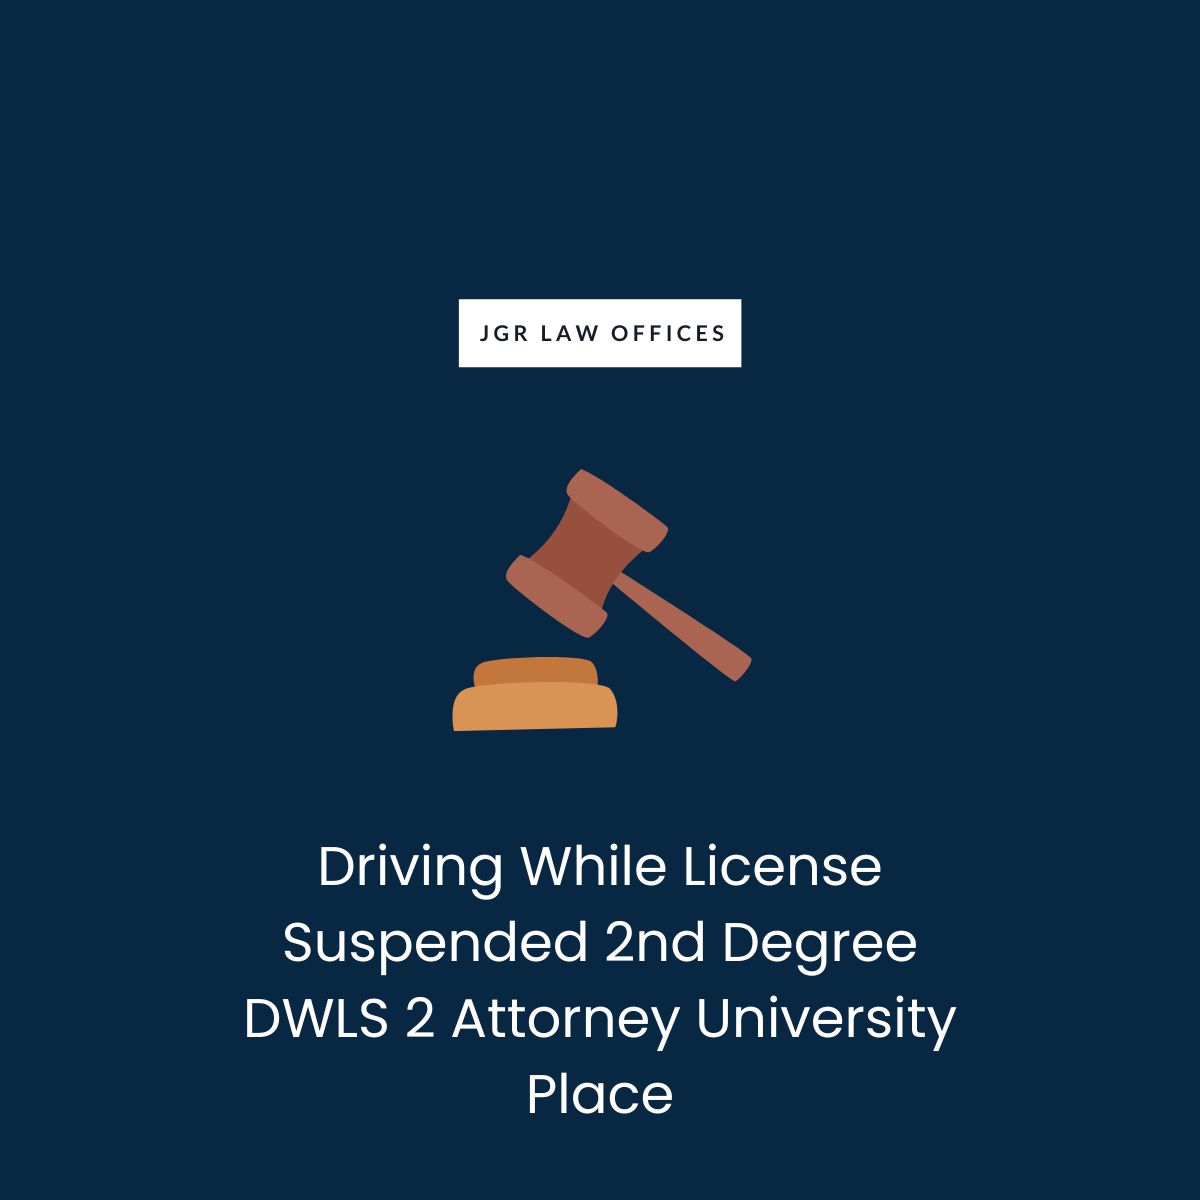 Driving While License Suspended 2nd Degree DWLS 2 Attorney University Place